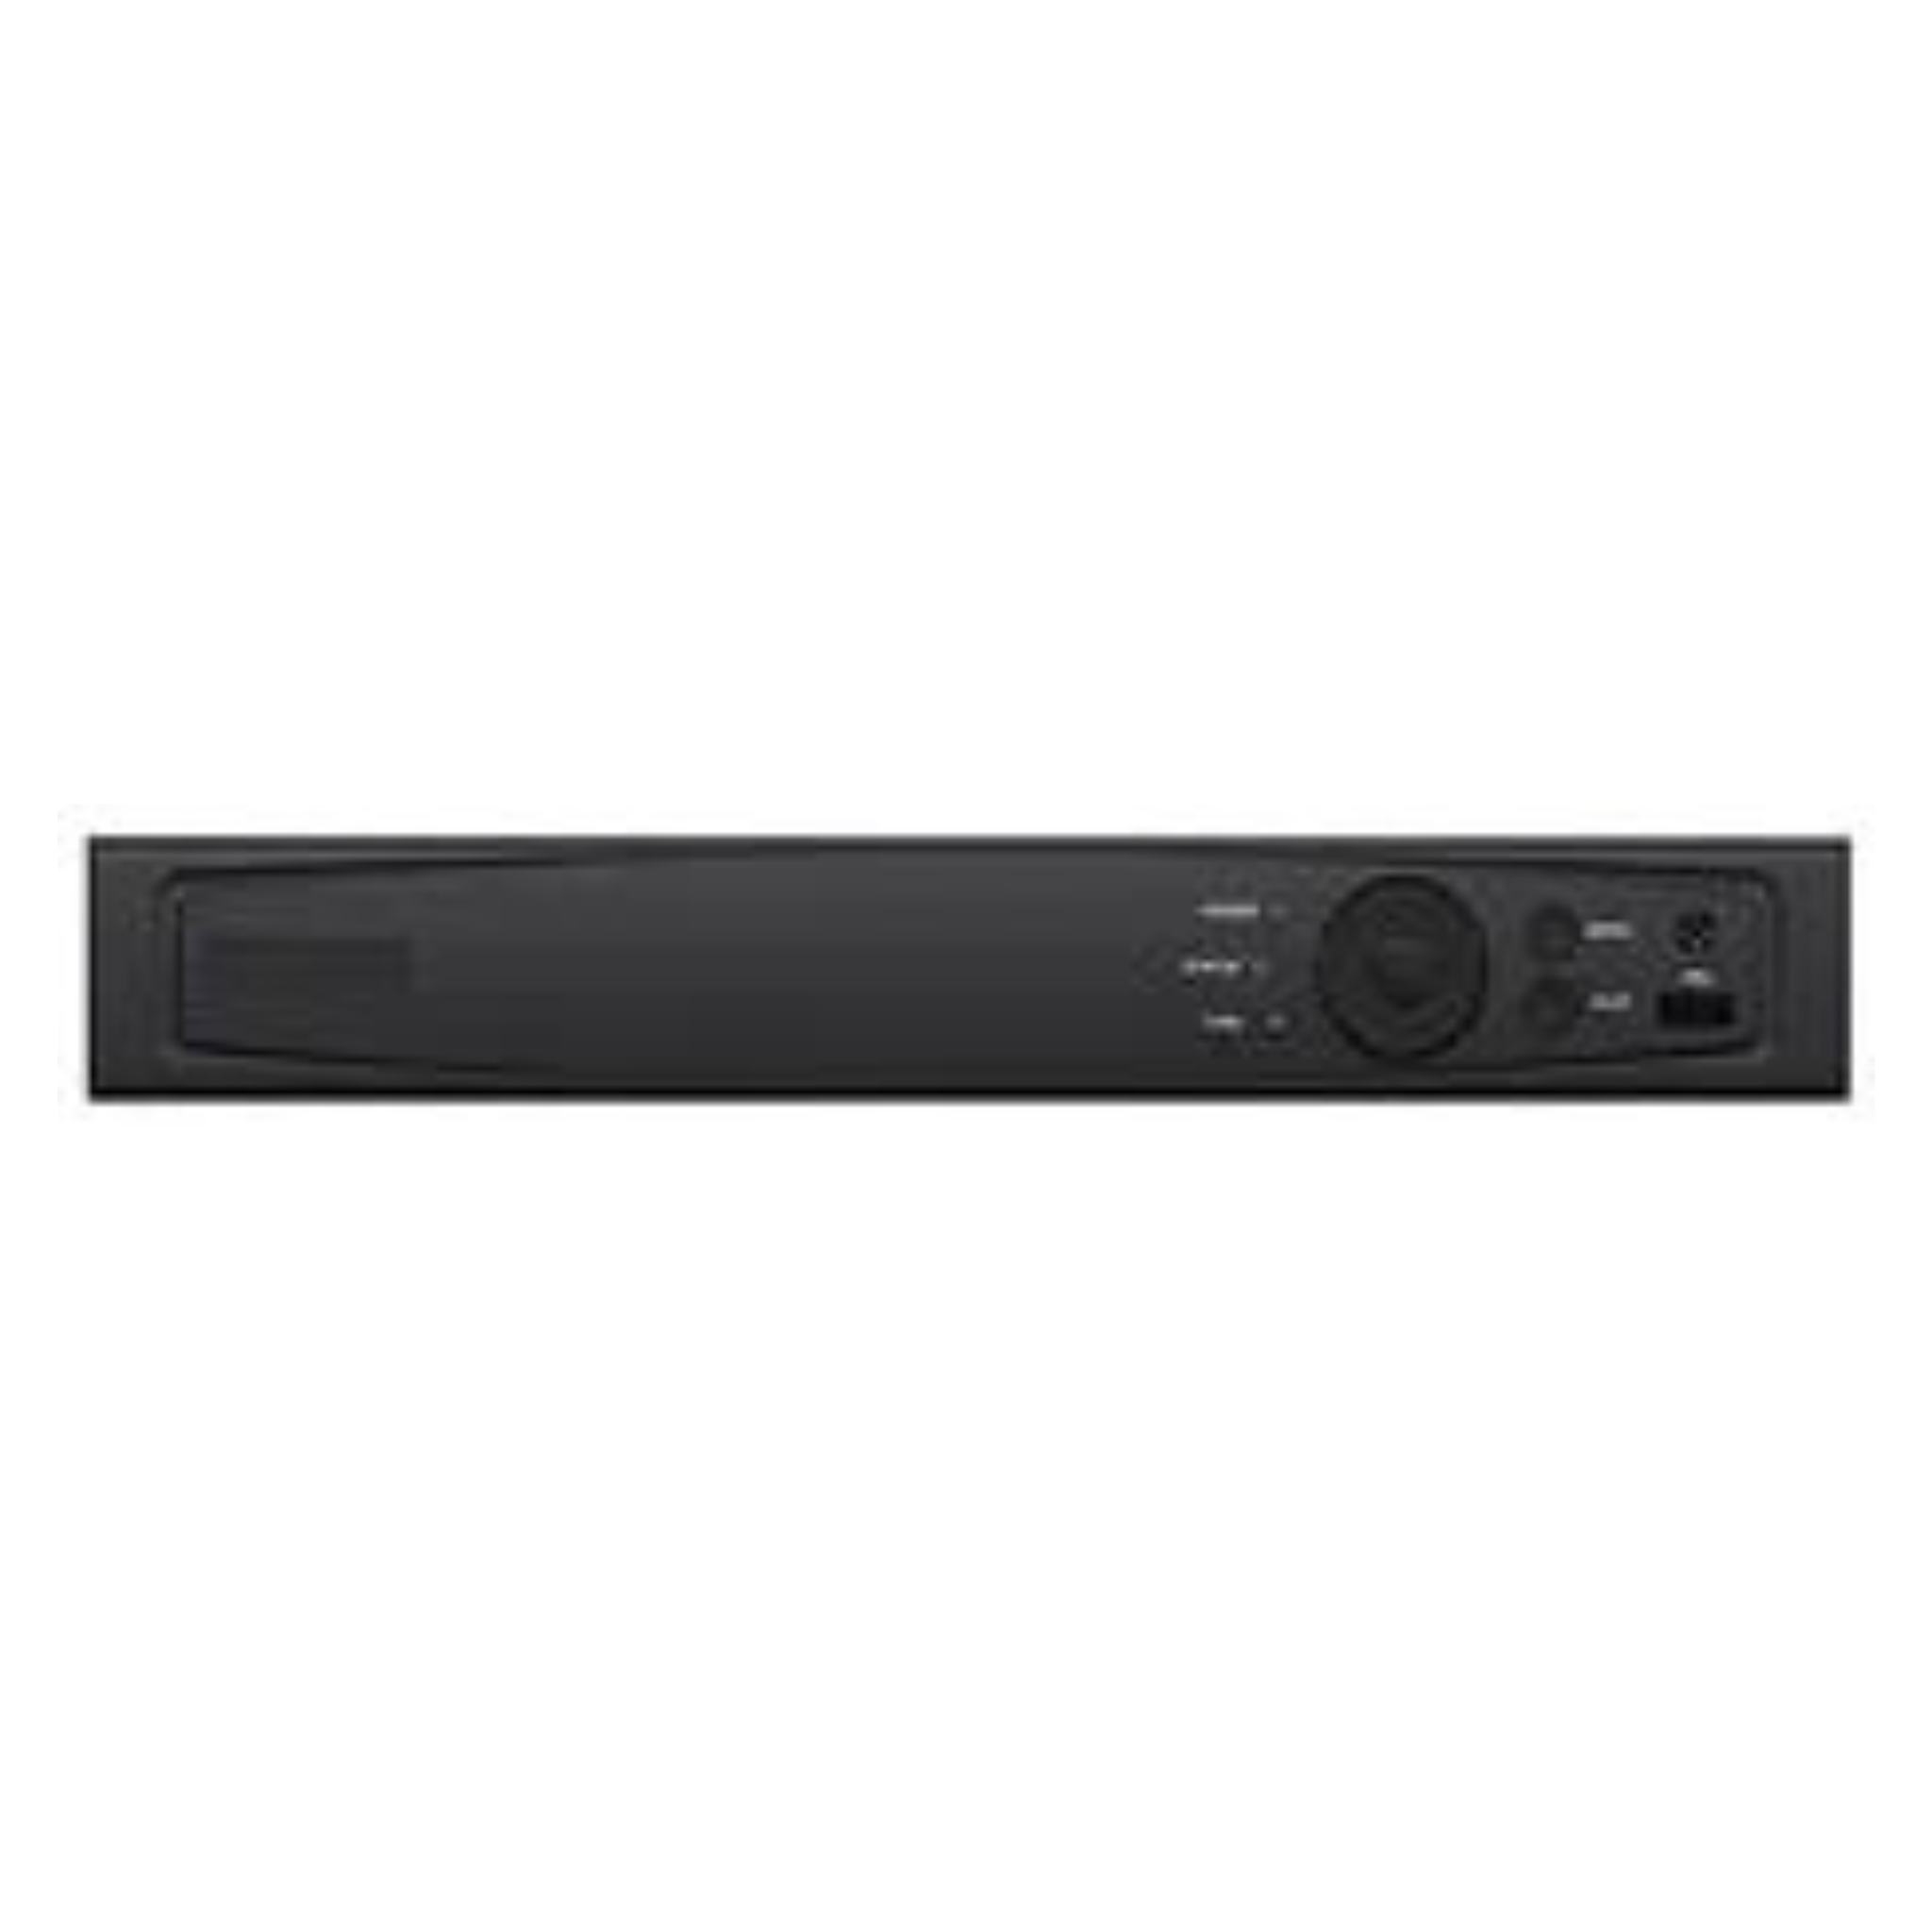 4K 16 Channel Hybrid DVR with Human/Vehicle Detection, H.265+ Pro, and Multiple Output Options